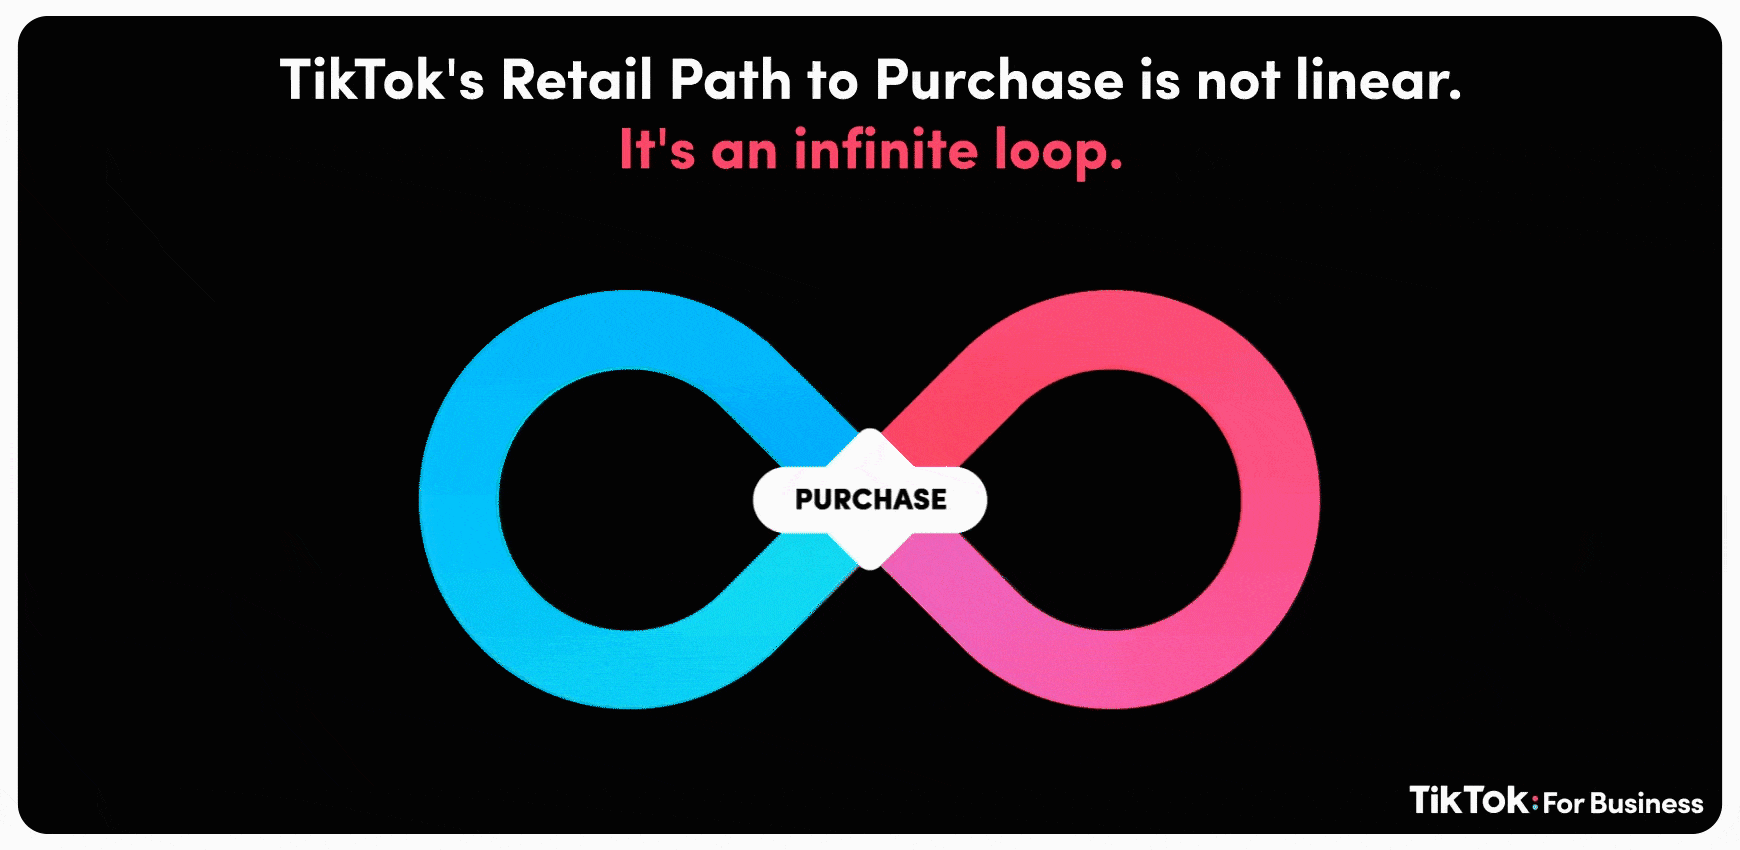 Titktok's Retail path to purchase. A loop that shows 4 areas - discovery, consideration, review and participation